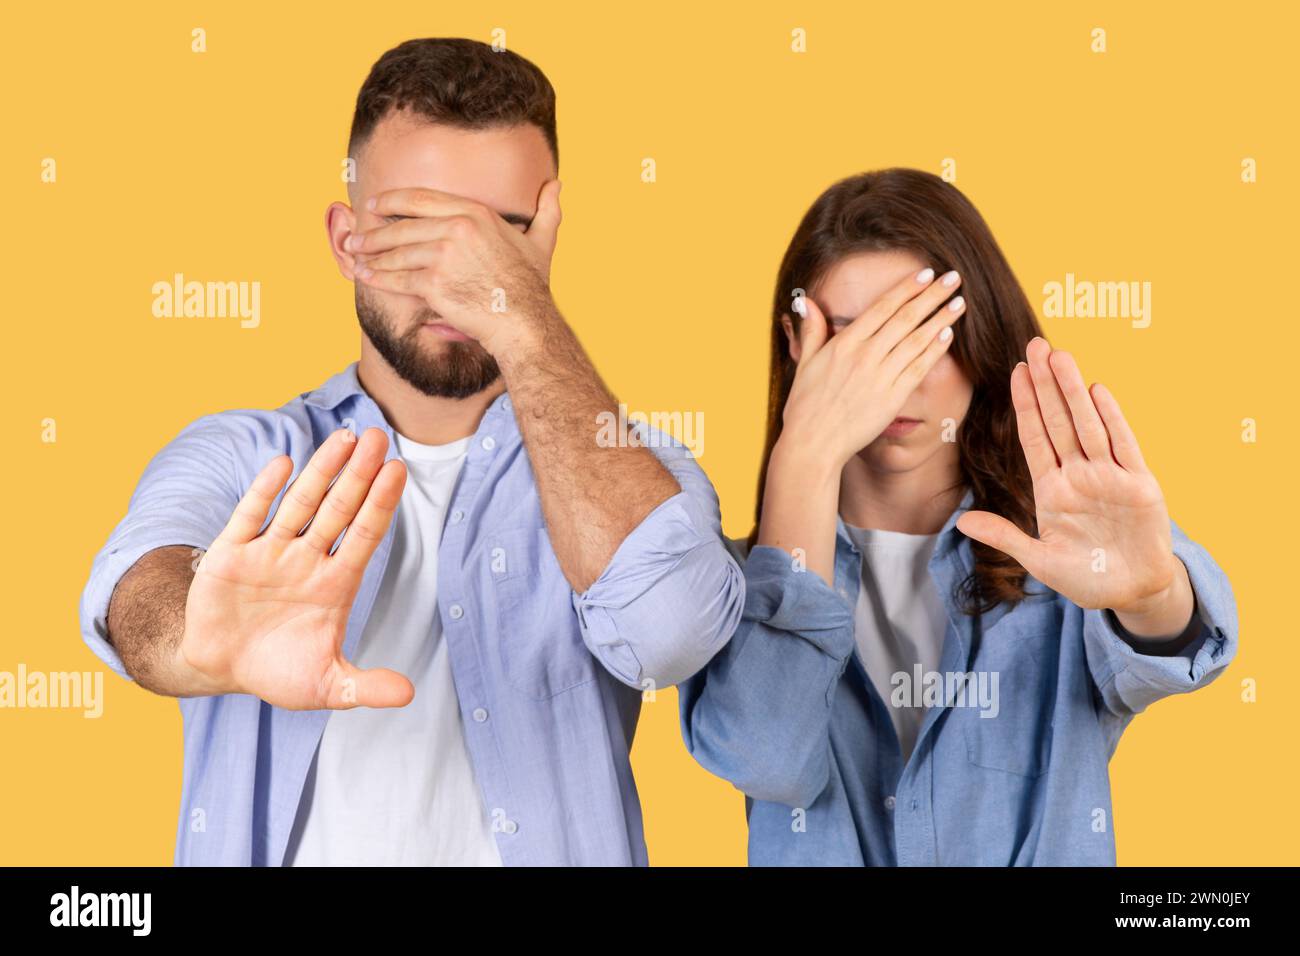 Man and woman covering eyes, showing stop hand gesture Stock Photo